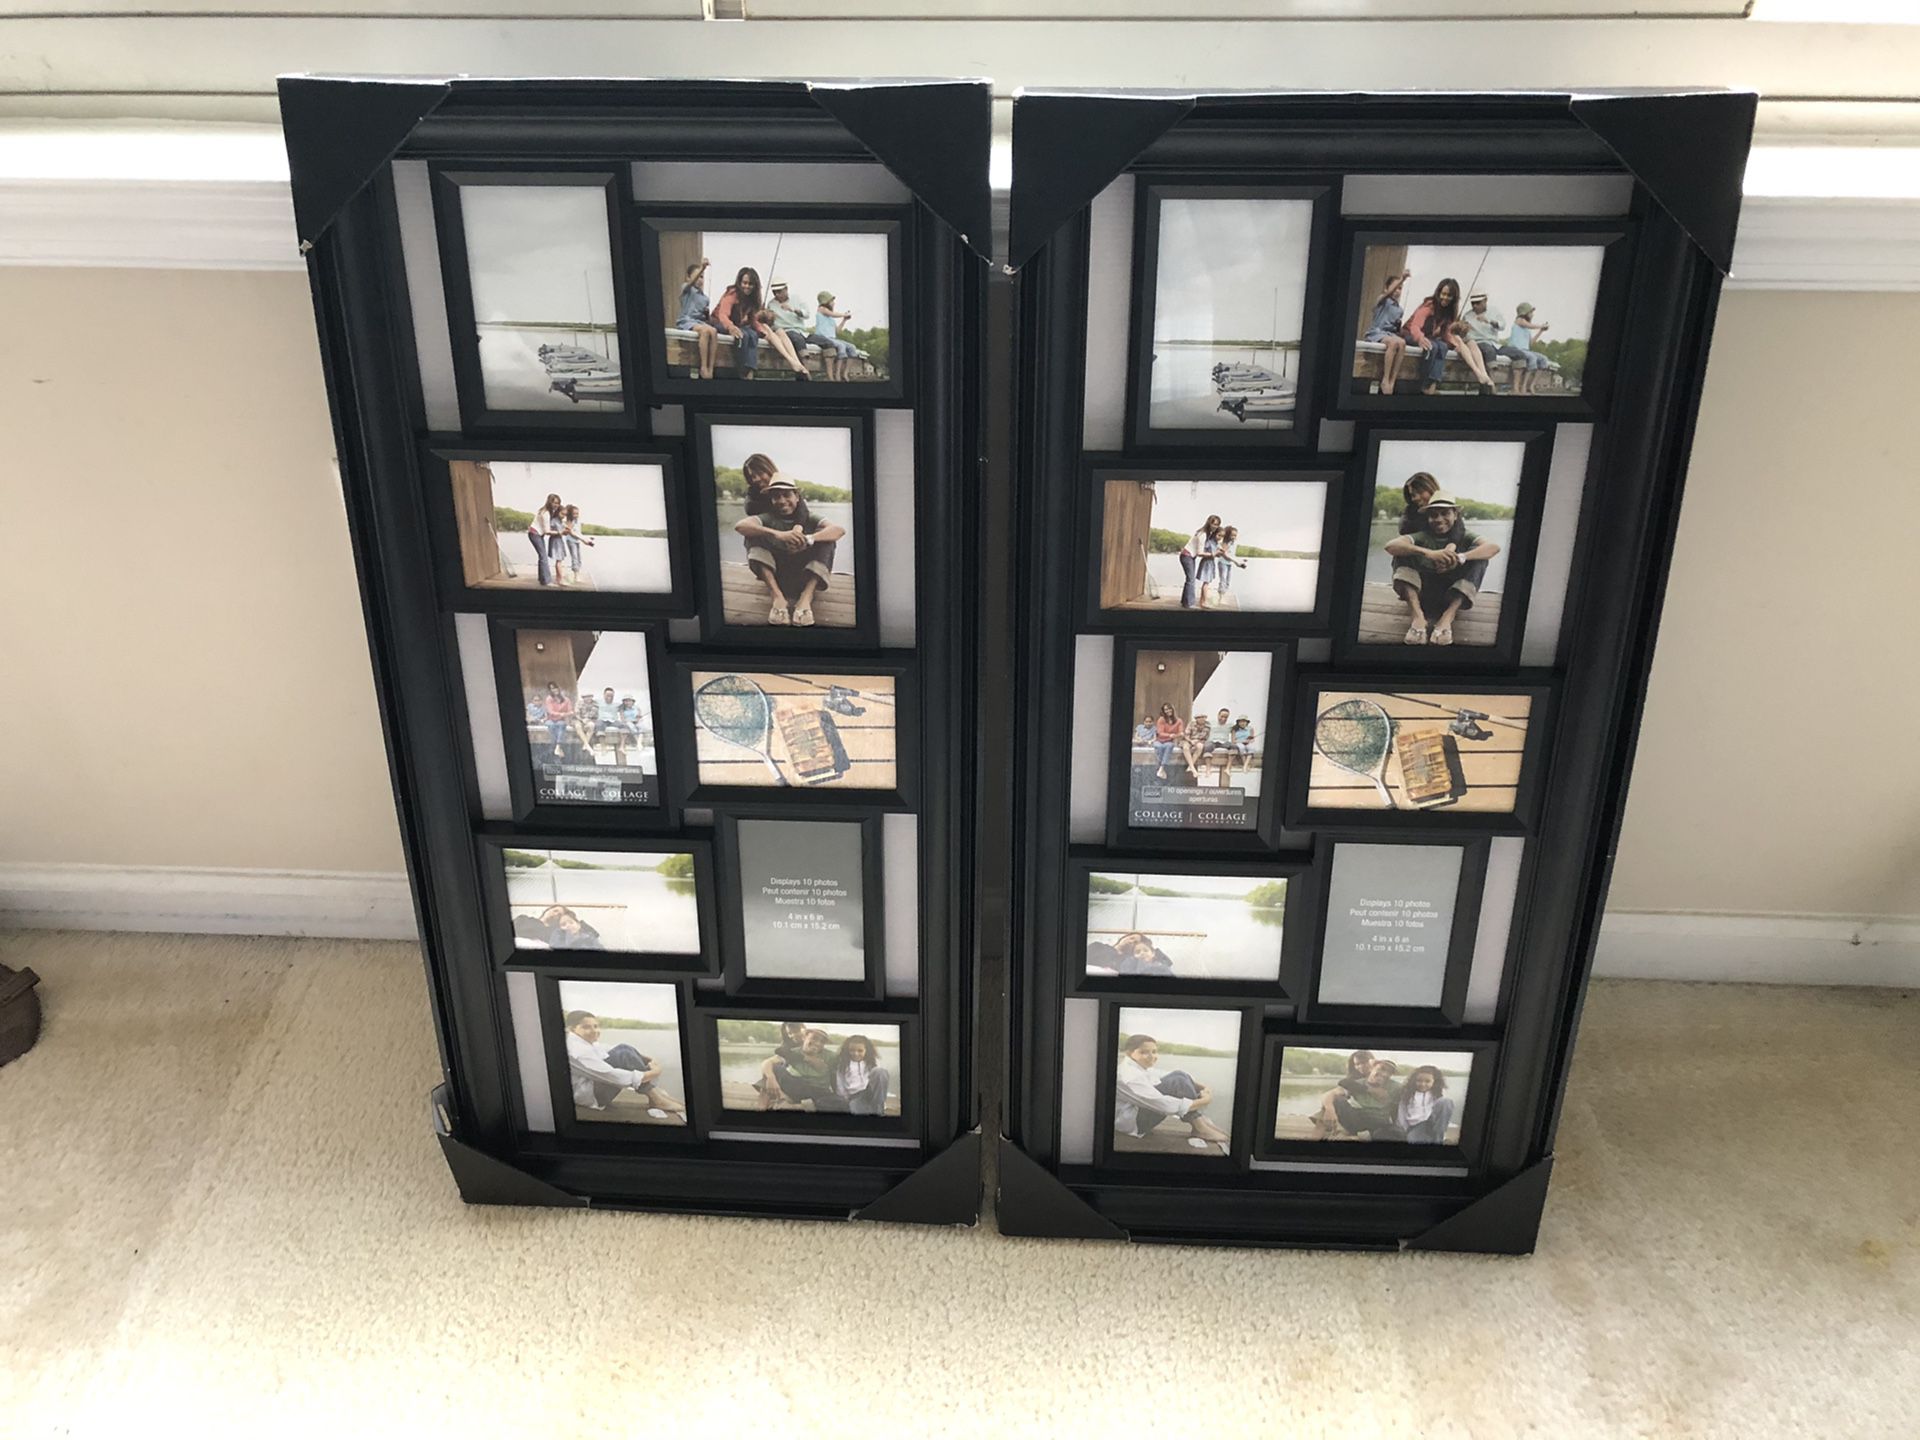 Two brand new pictures frame sets